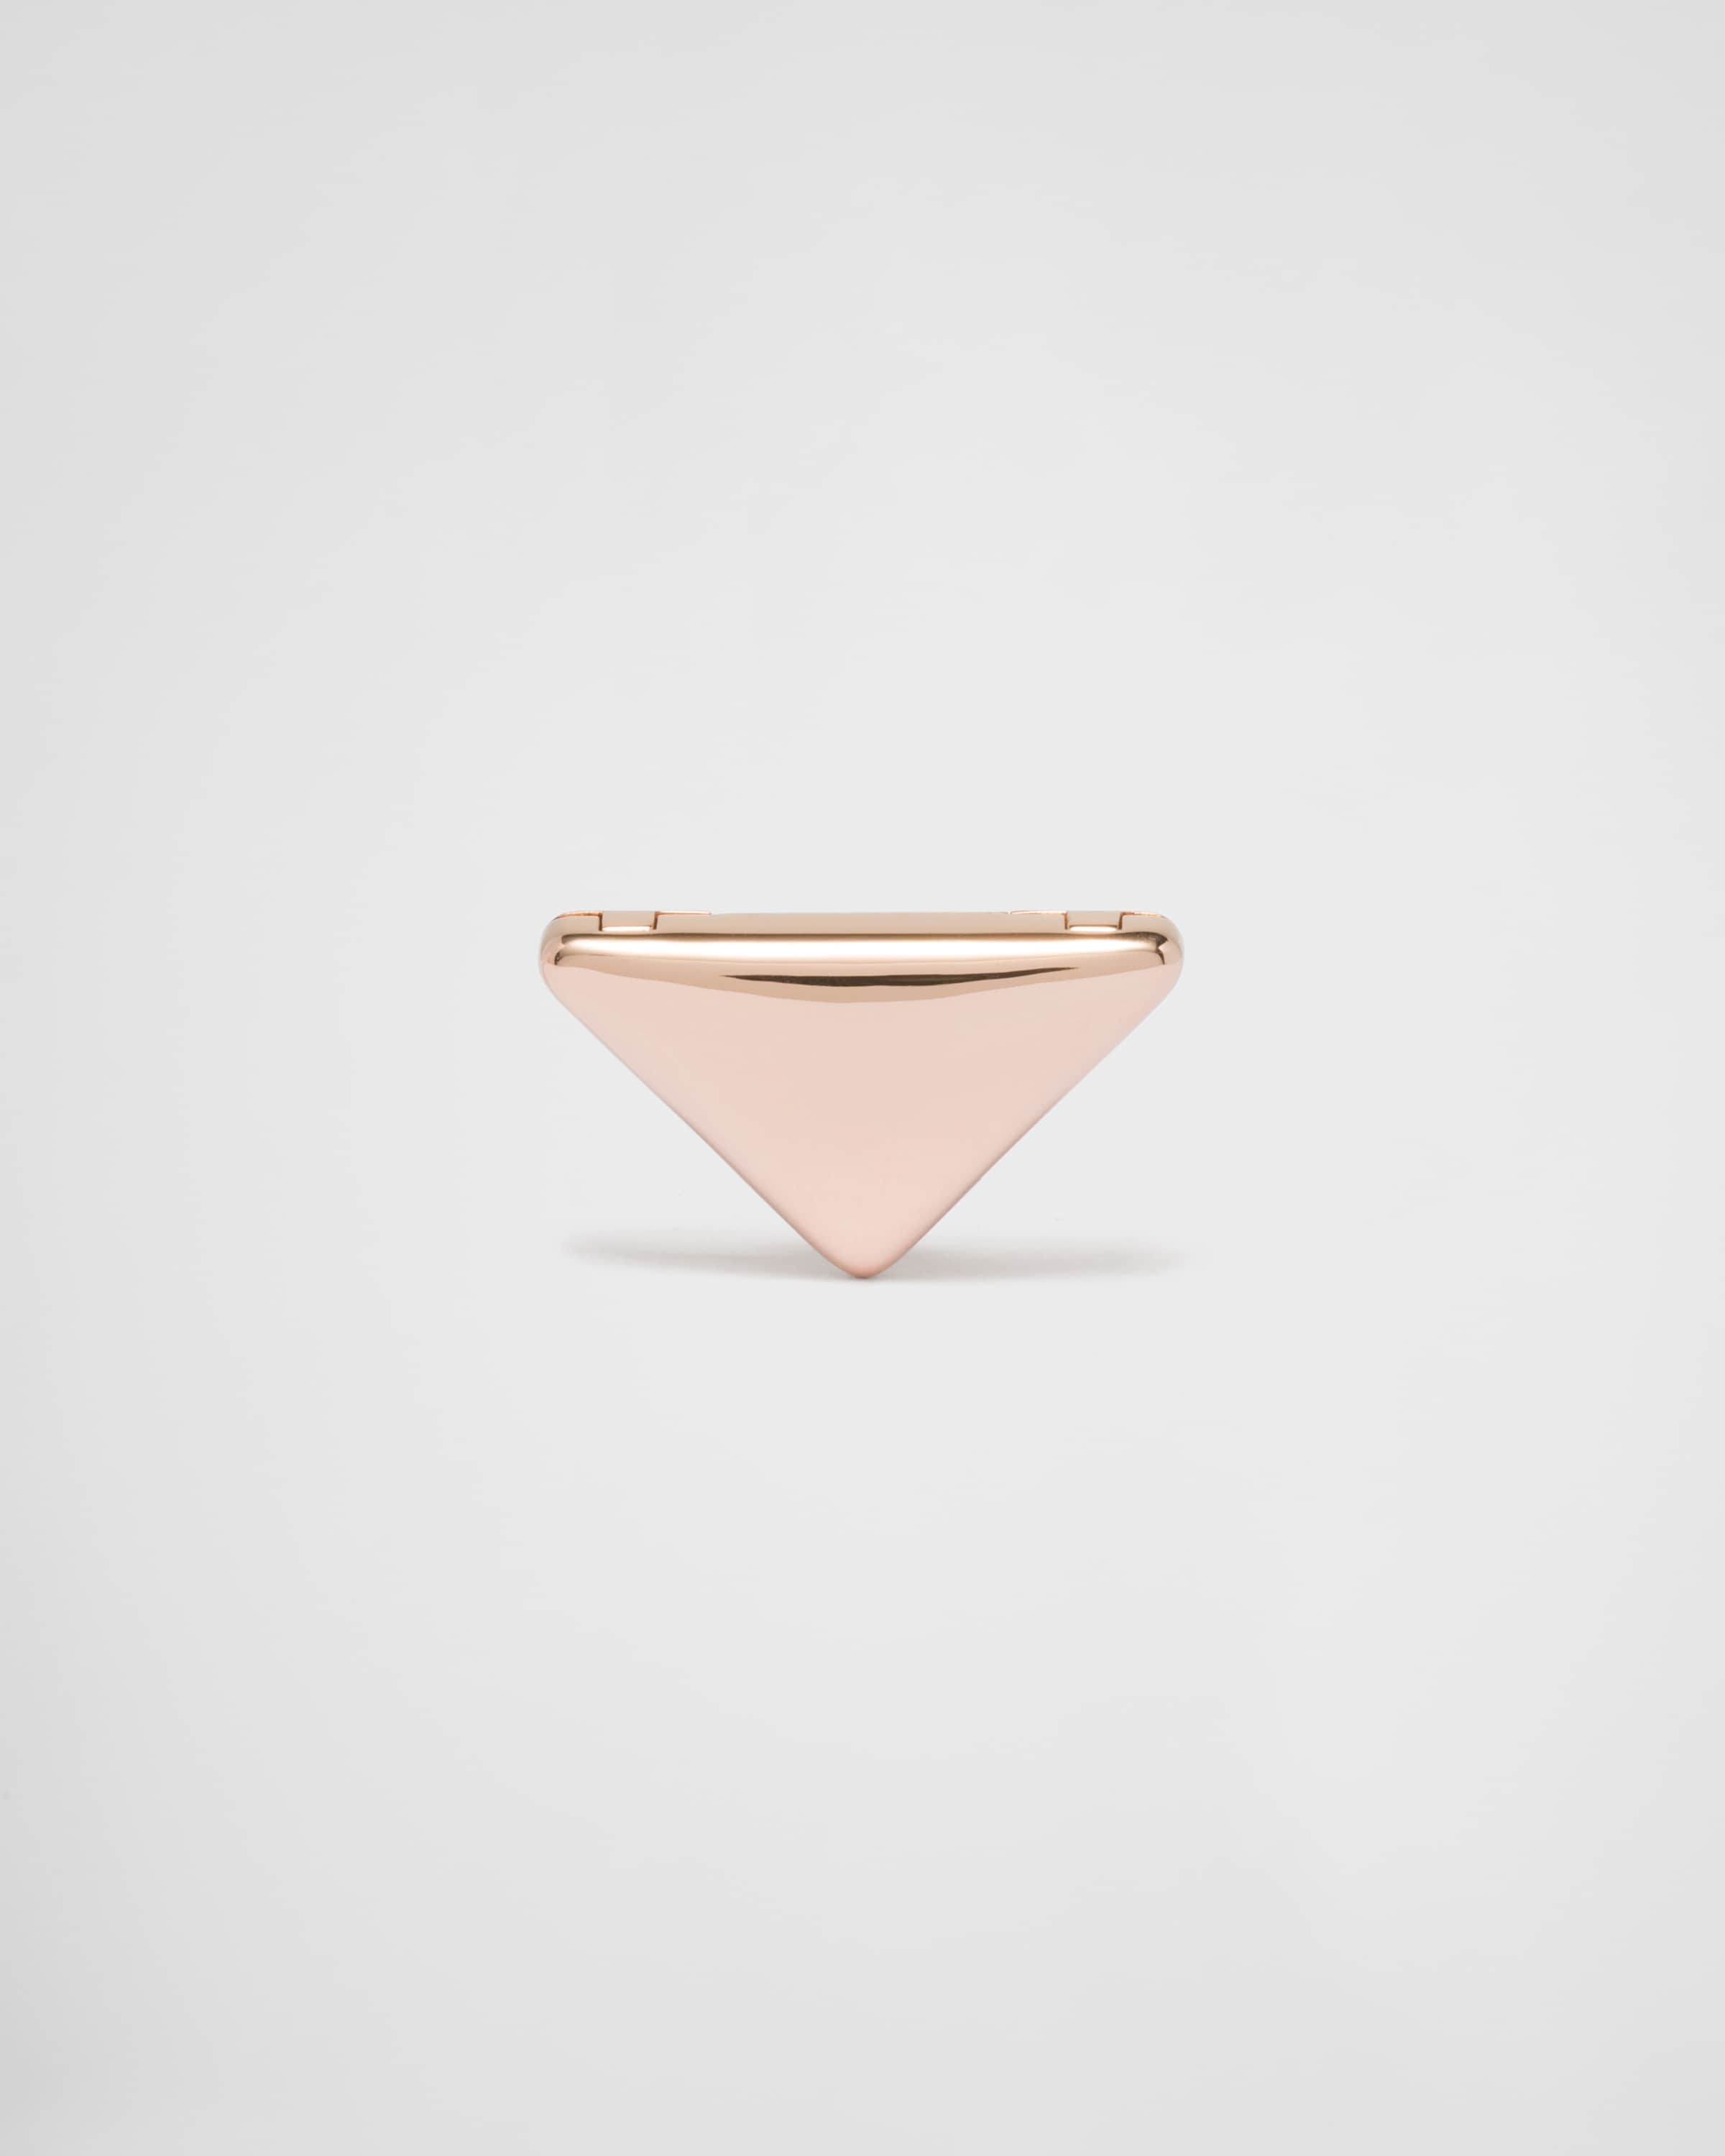 Eternal Gold small triangle brooch in pink gold - 1